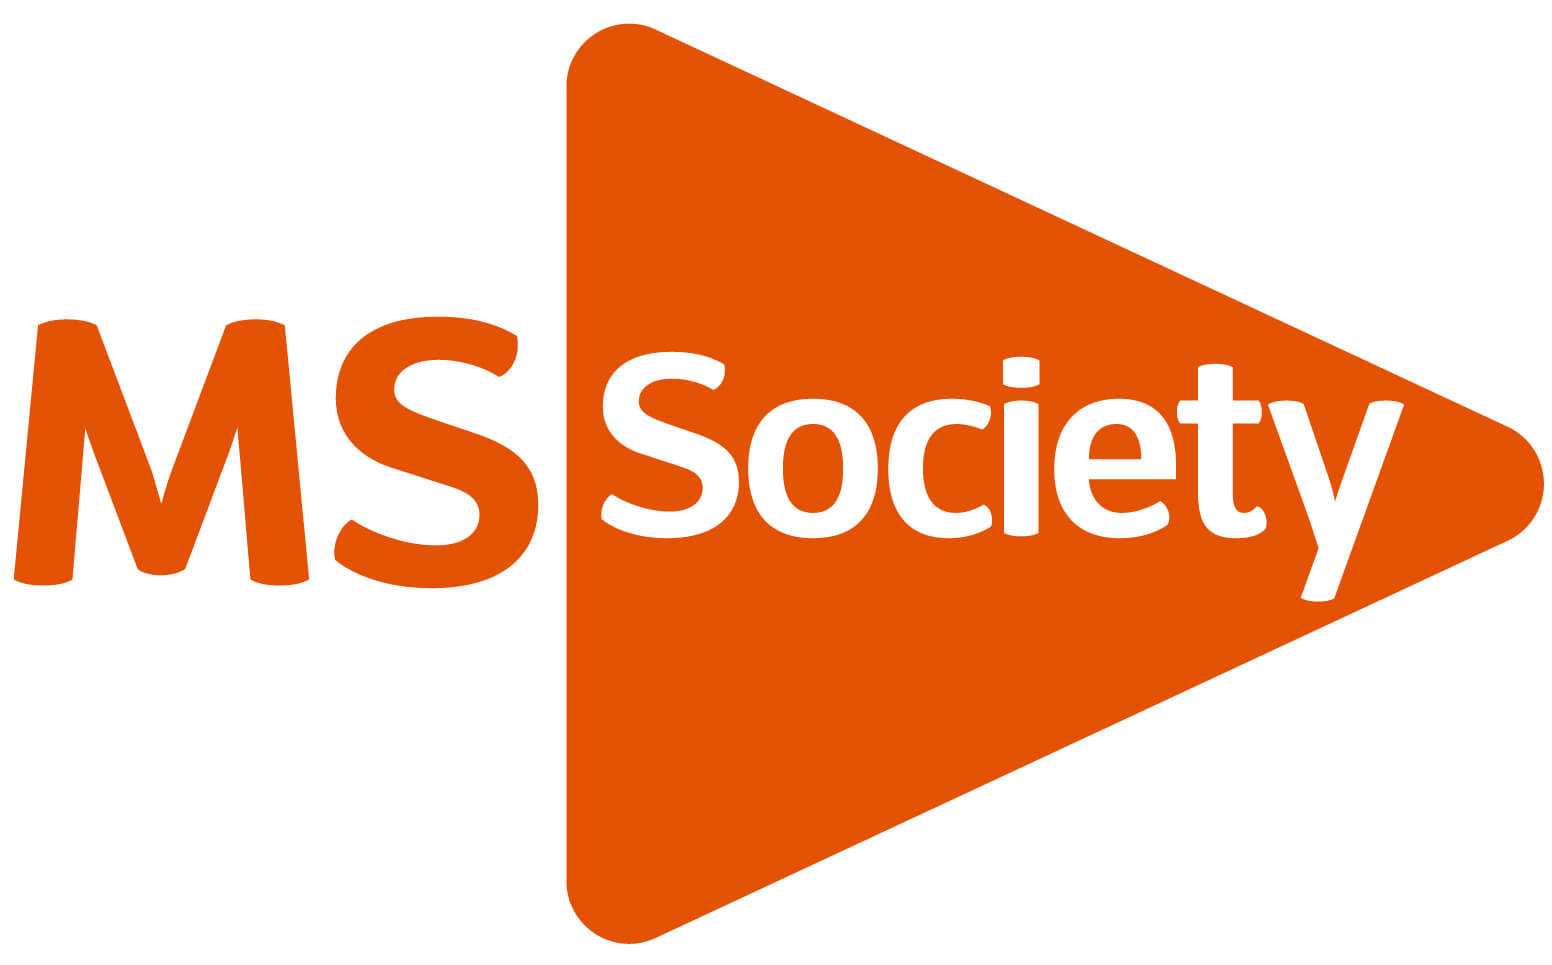 Multiple Sclerosis charity